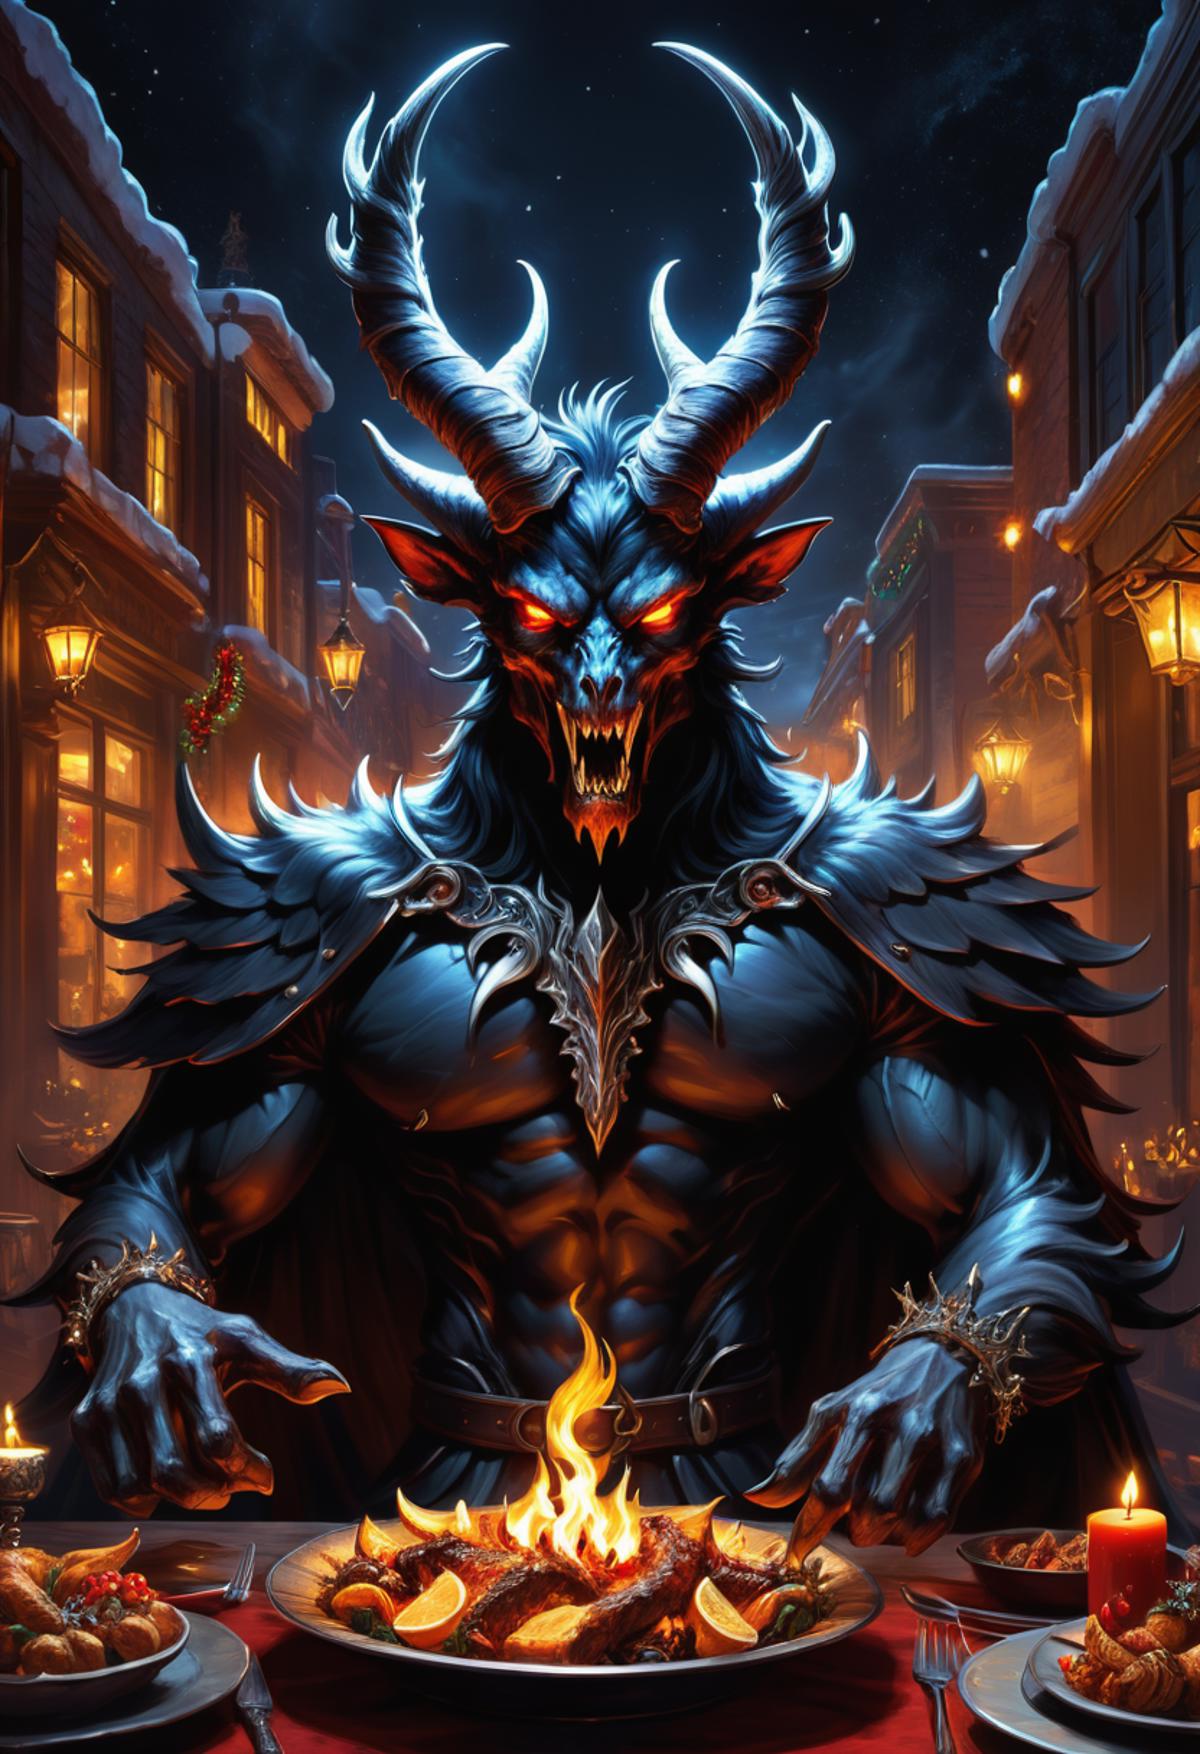 The Demon King with Horns and a Fire in His Hand